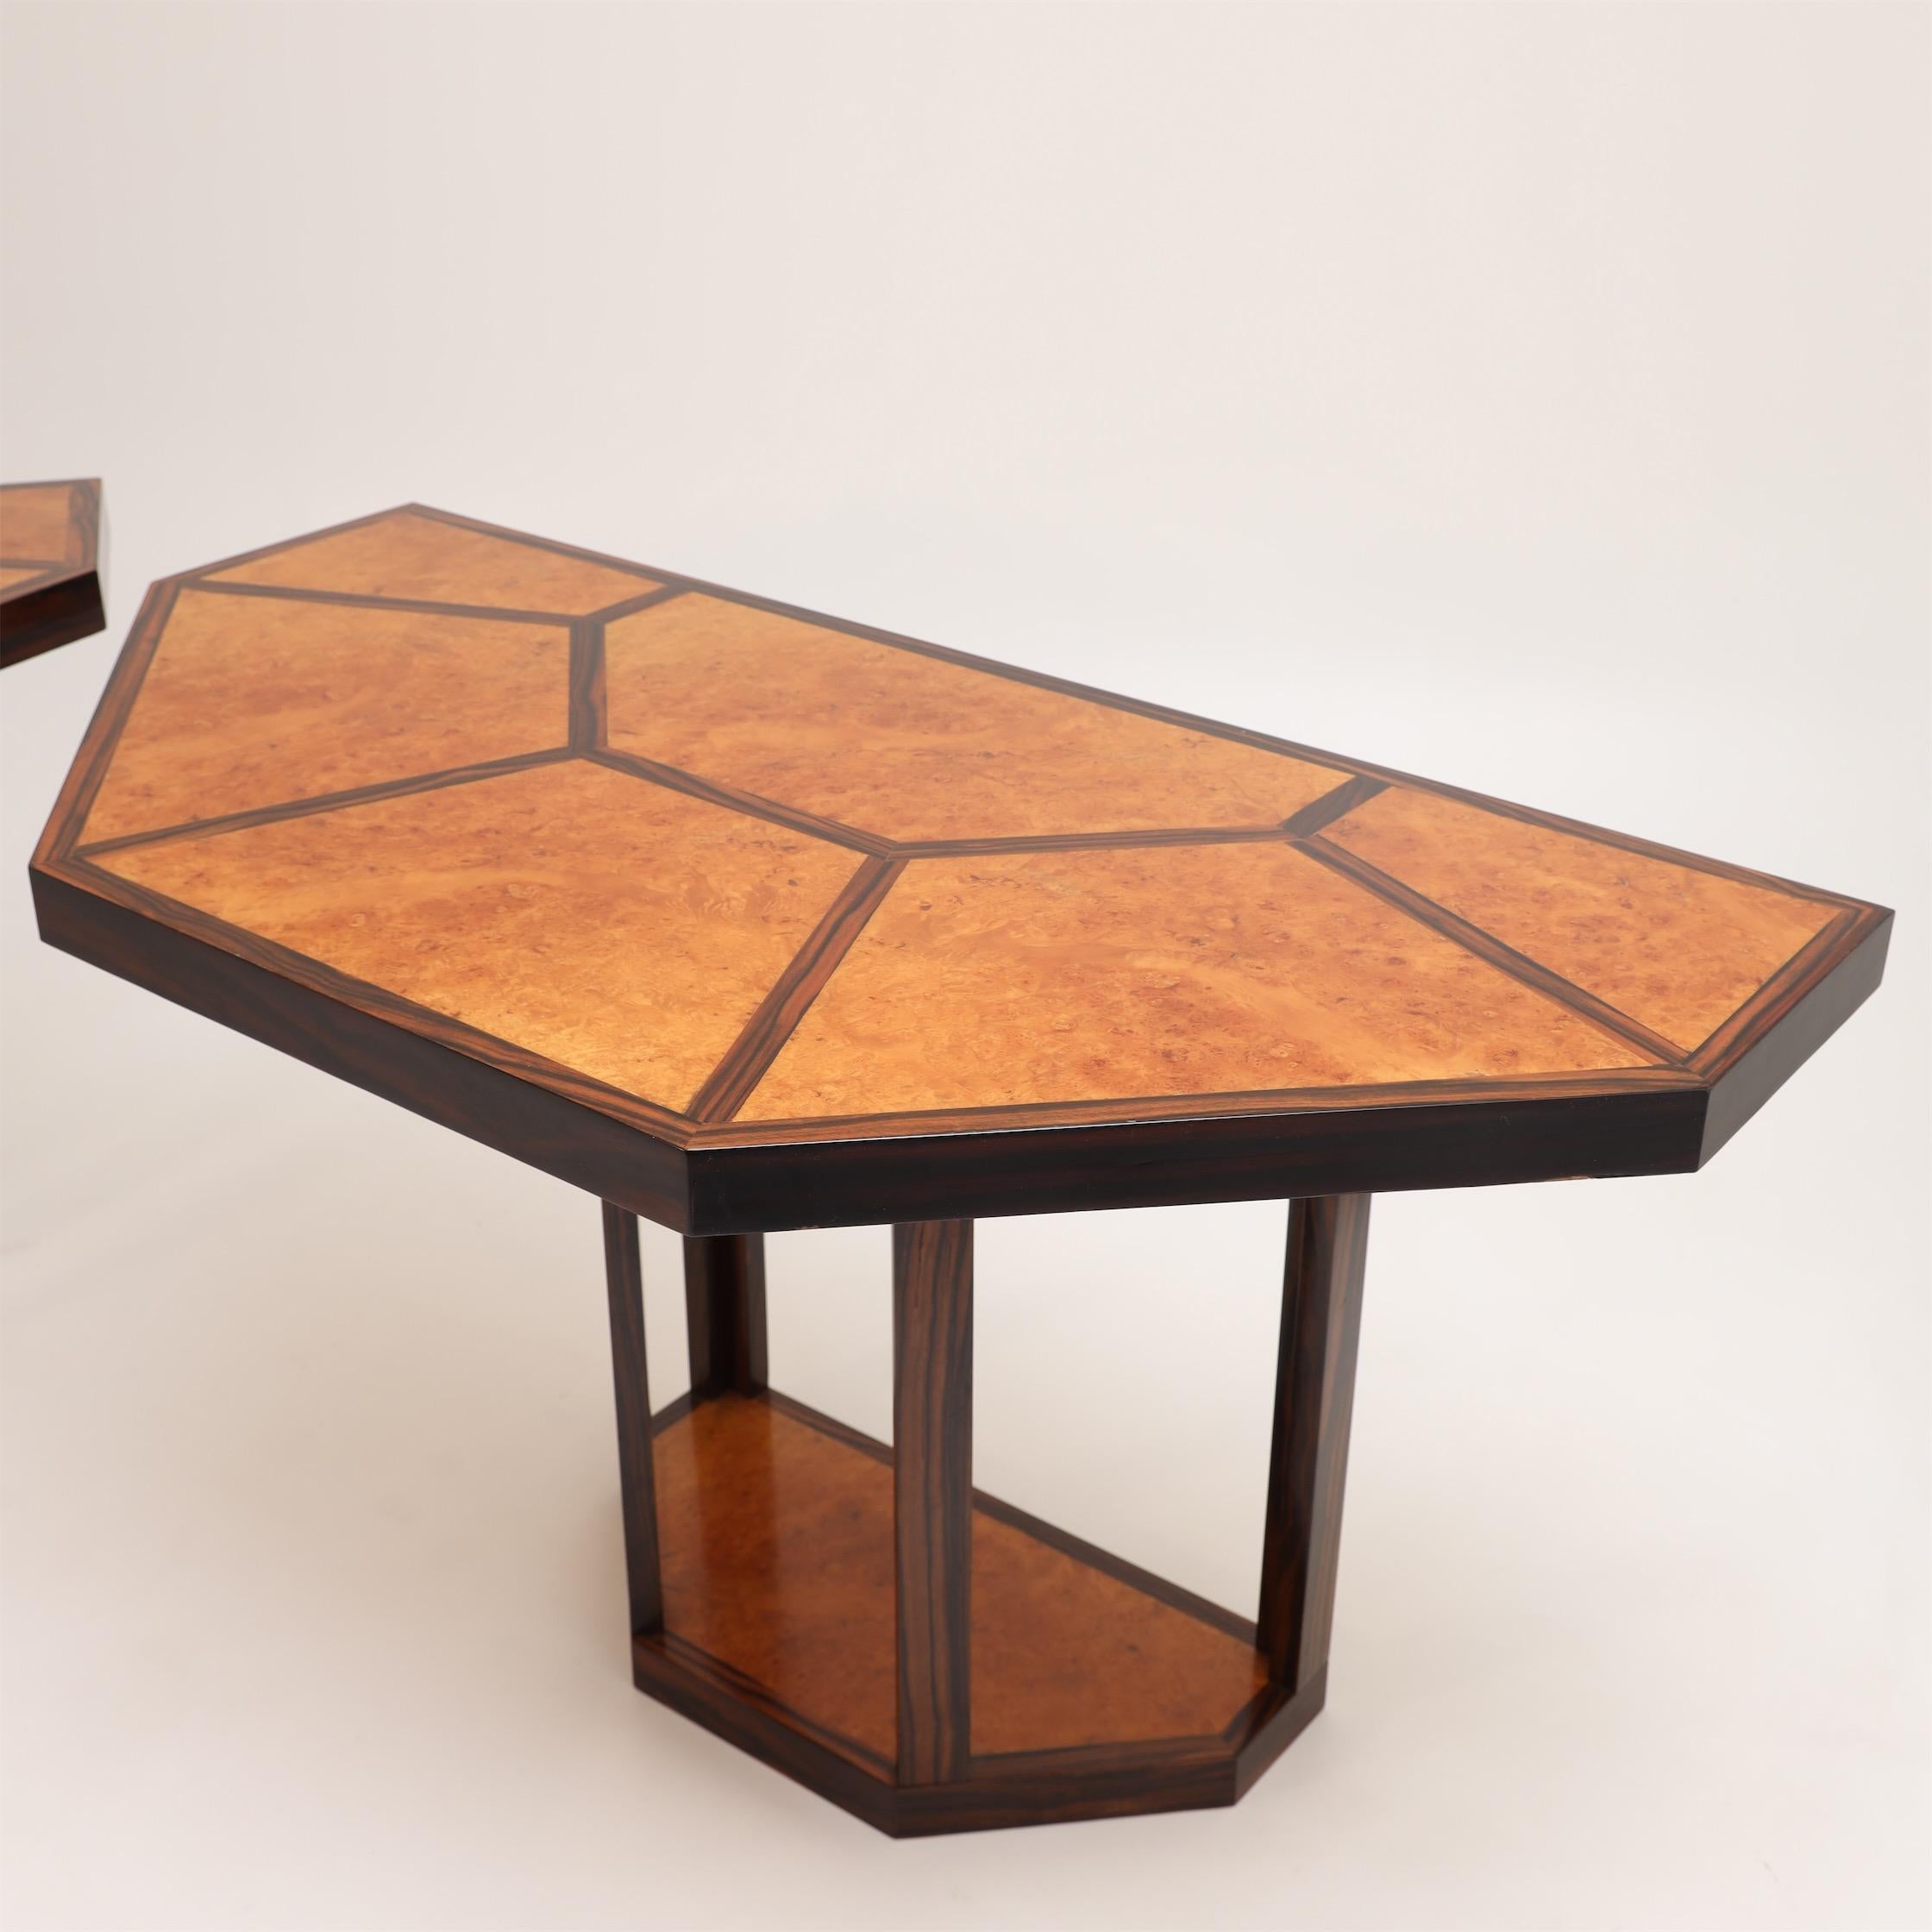 Wood Gabriella Crespi 'Puzzle' Table, Italy, 1970s